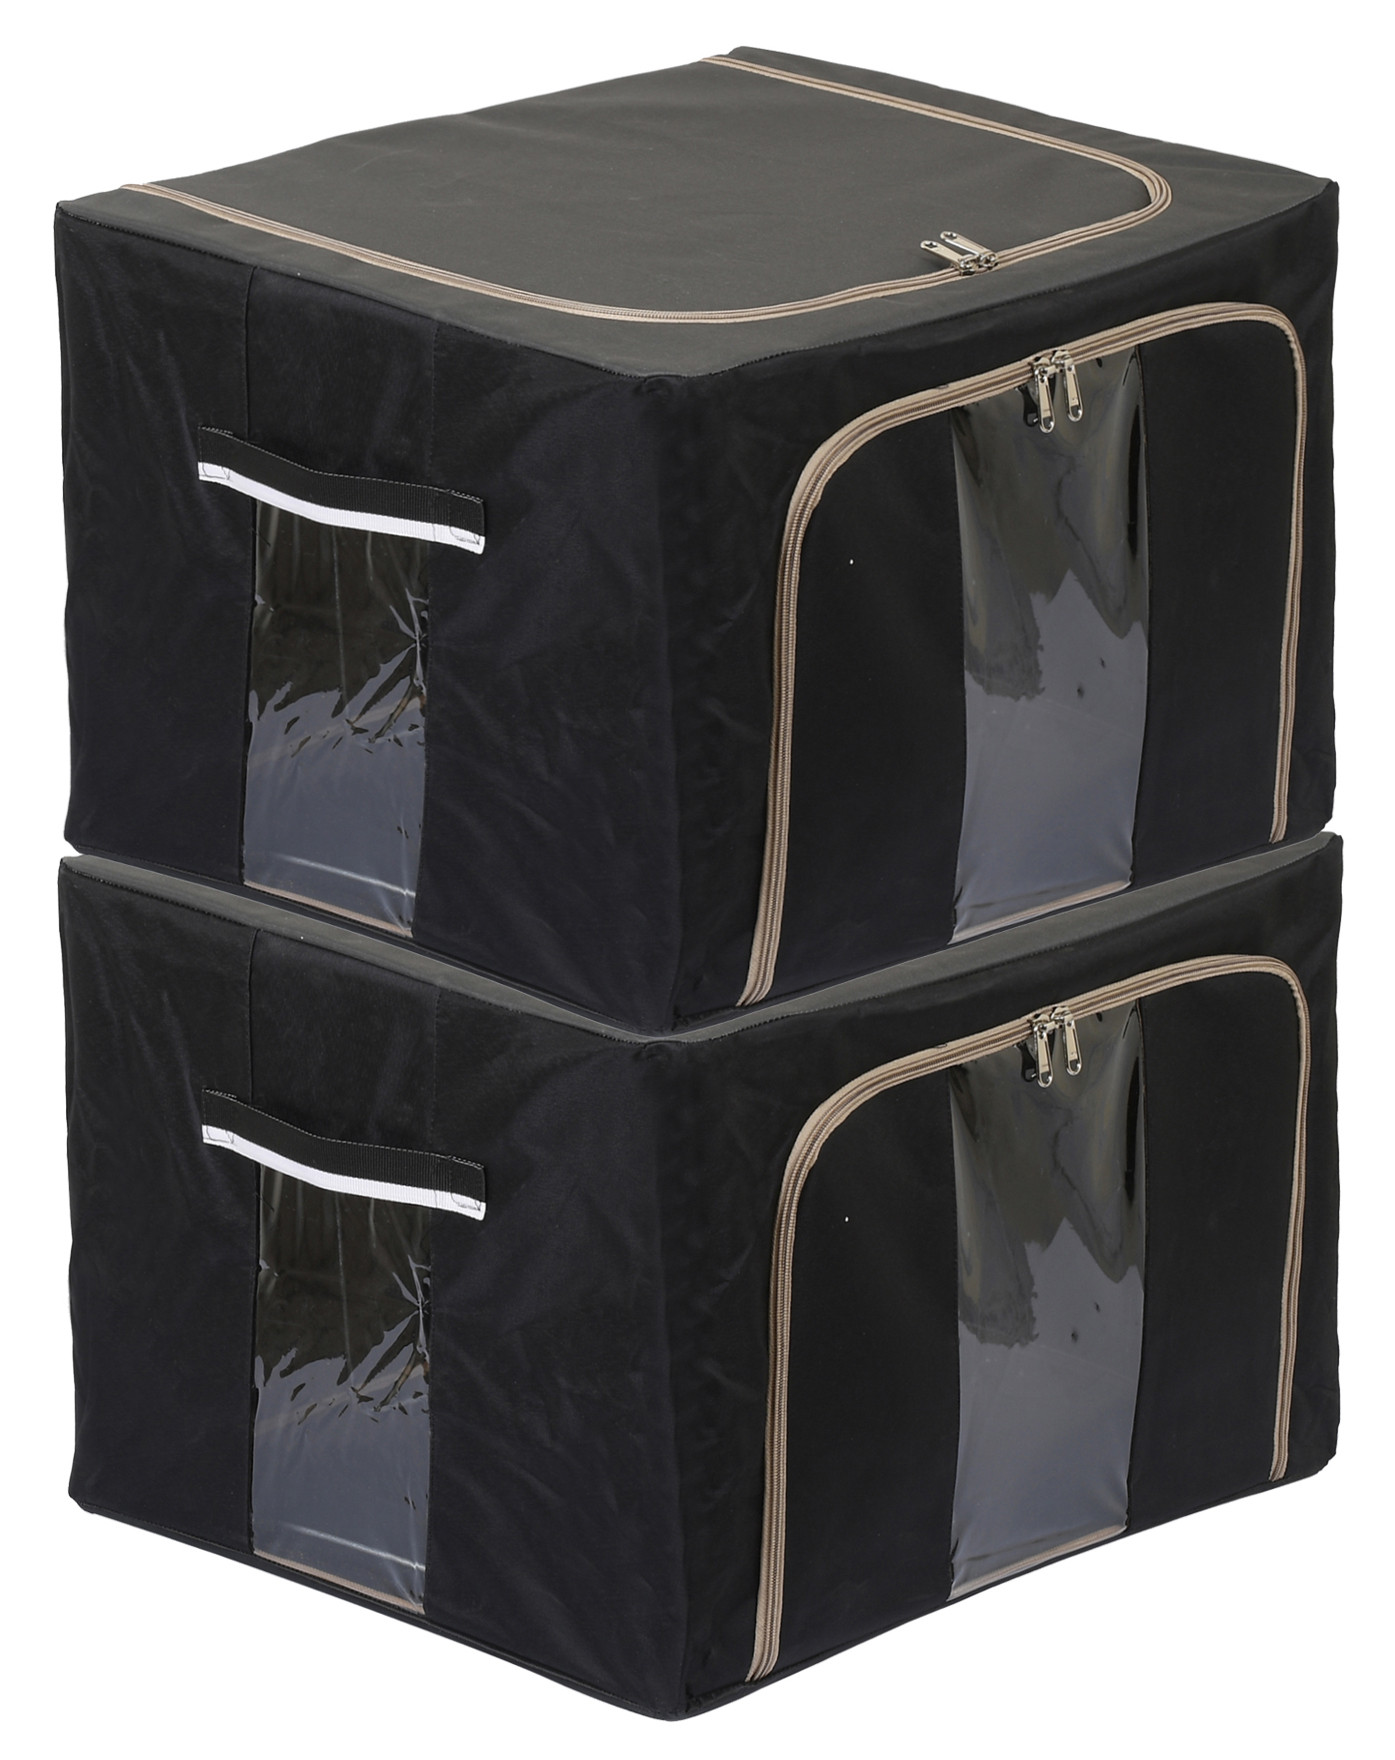 Kuber Industries Steel Frame Storage Box/Organizer For Clothing, Blankets, Bedding With Clear Window, 44Ltr. (Black & Grey)-44KM0301